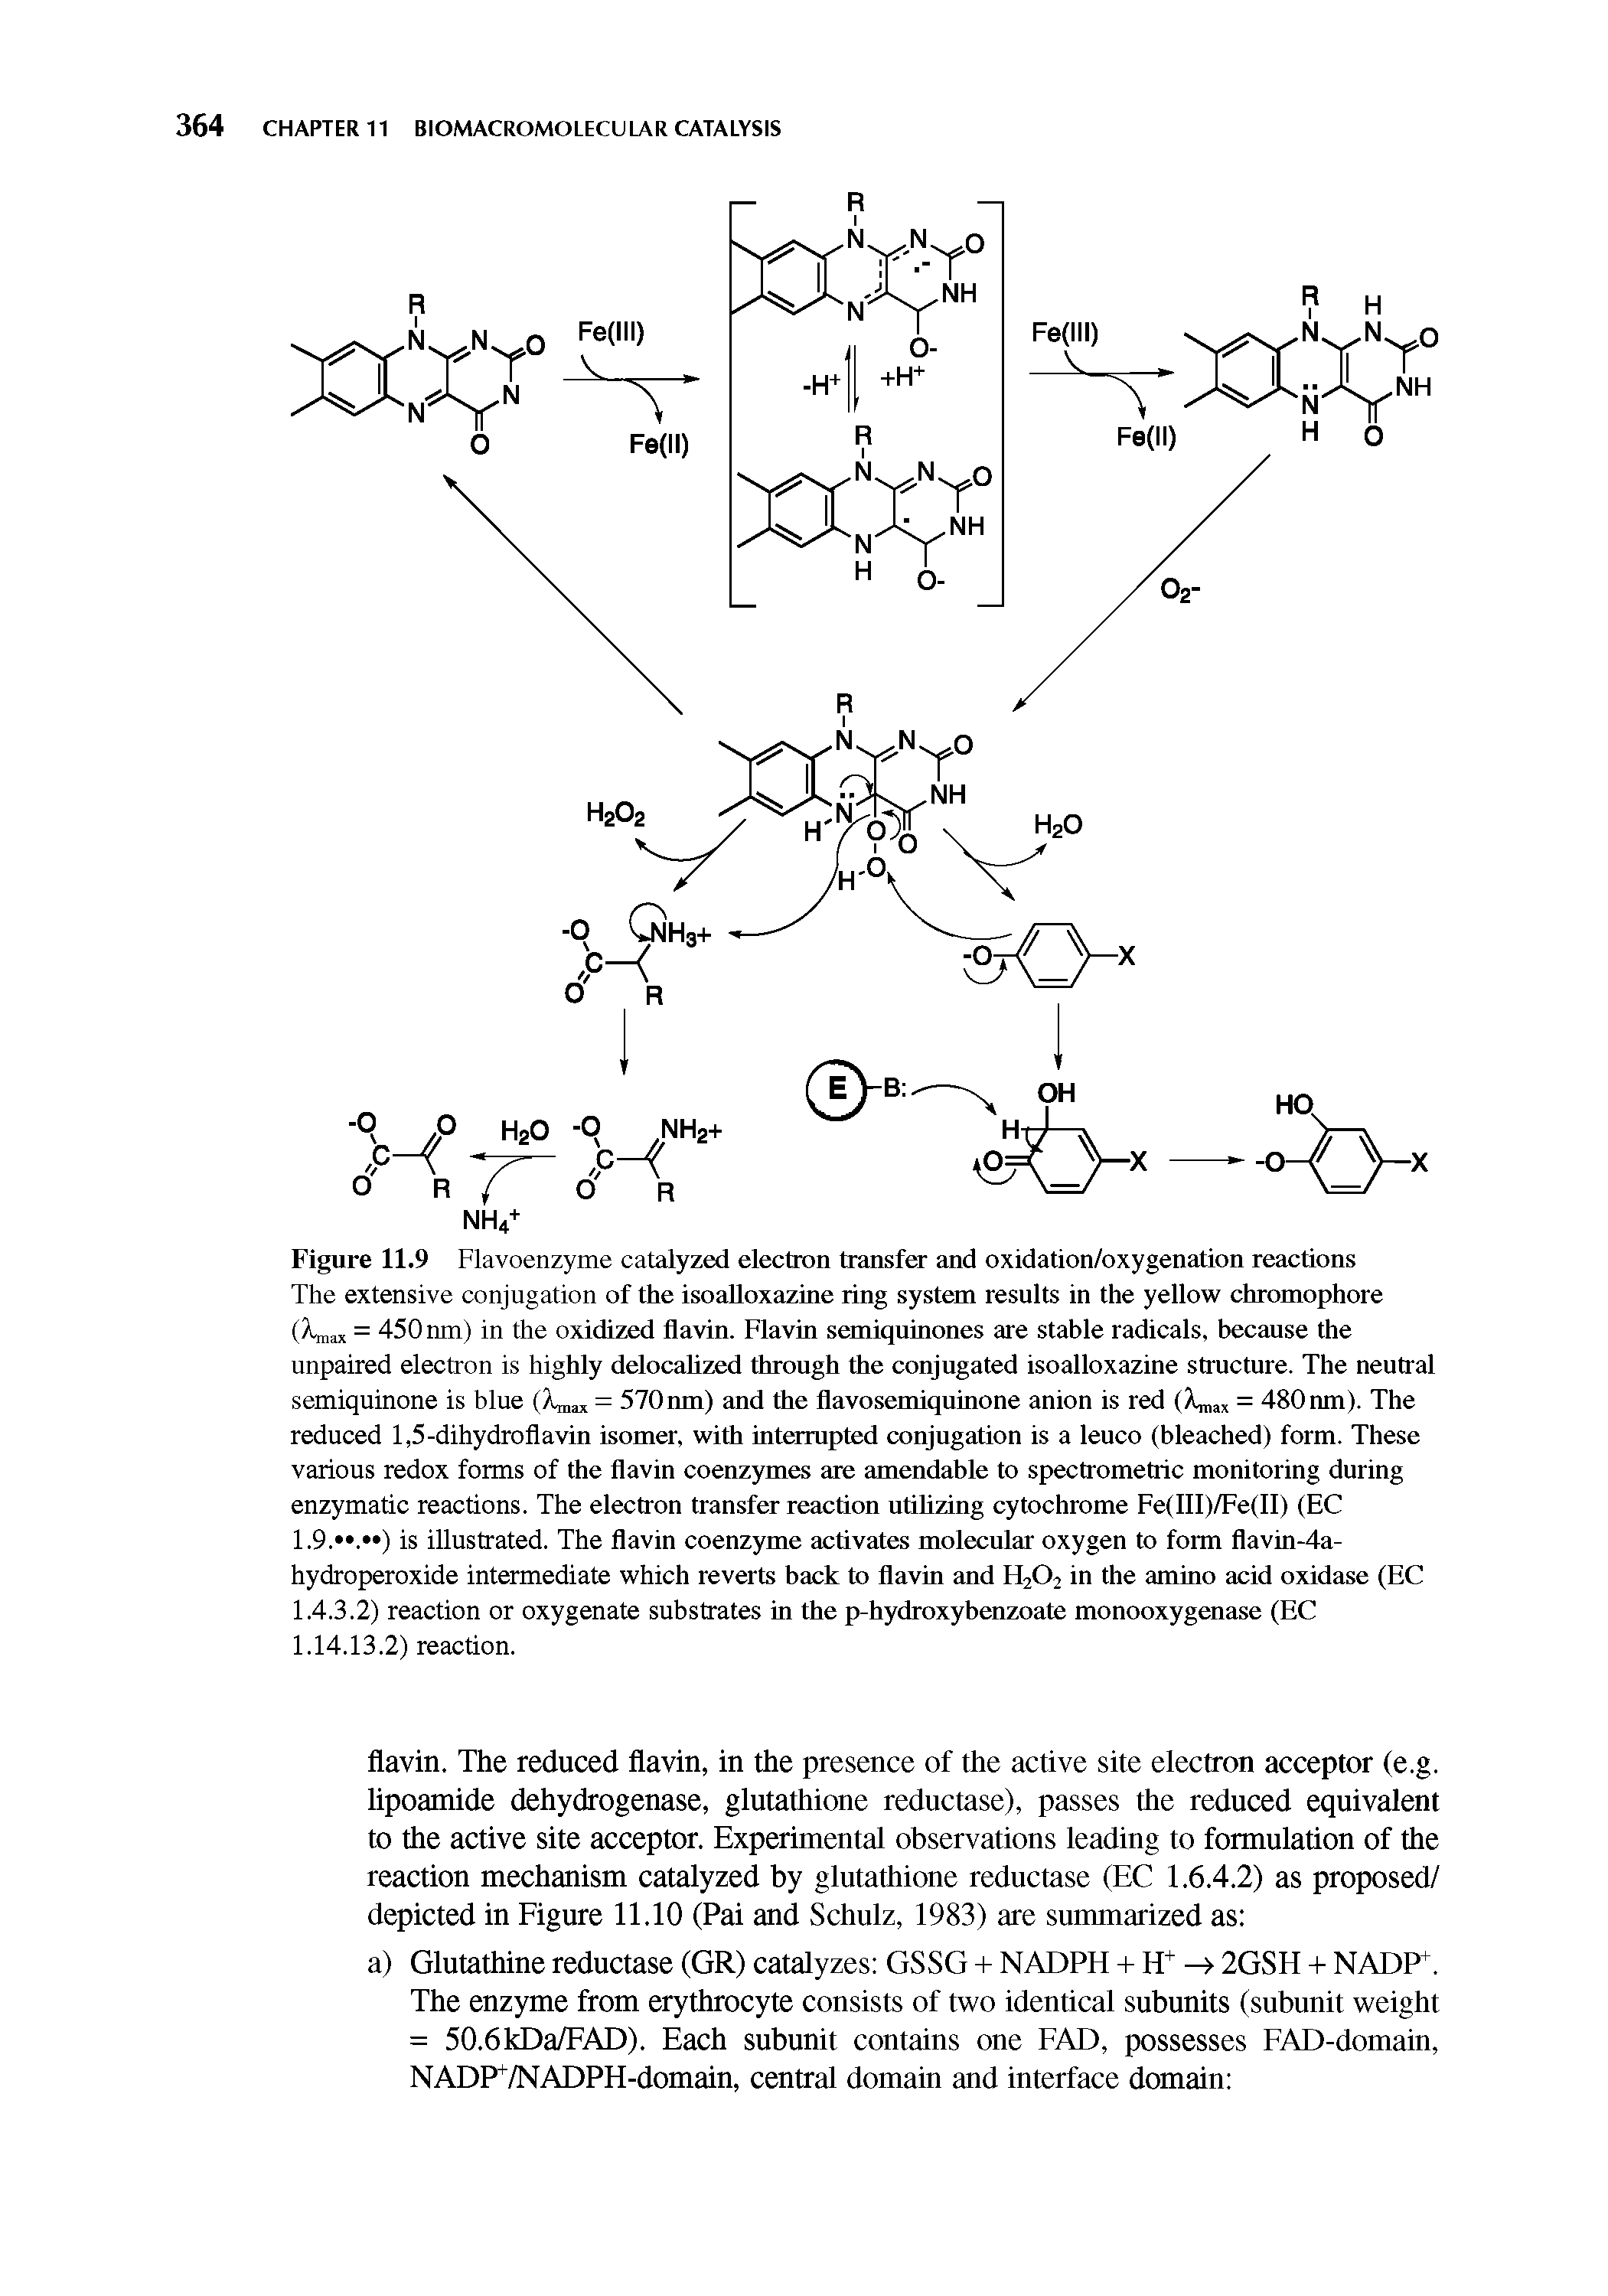 Figure 11.9 Flavoenzyme catalyzed electron transfer and oxidation/oxygenation reactions The extensive conjugation of the isoaUoxazine ring system results in the yellow chromophore ( ax = 450 nm) in the oxidized flavin. Flavin semiquinones are stable radicals, because the unpaired electron is highly delocalized through the conjugated isoaUoxazine structure. The neutral semiquinone is blue = 570 nm) and the flavosemiquinone anion is red (A ax = 480 nm). The...